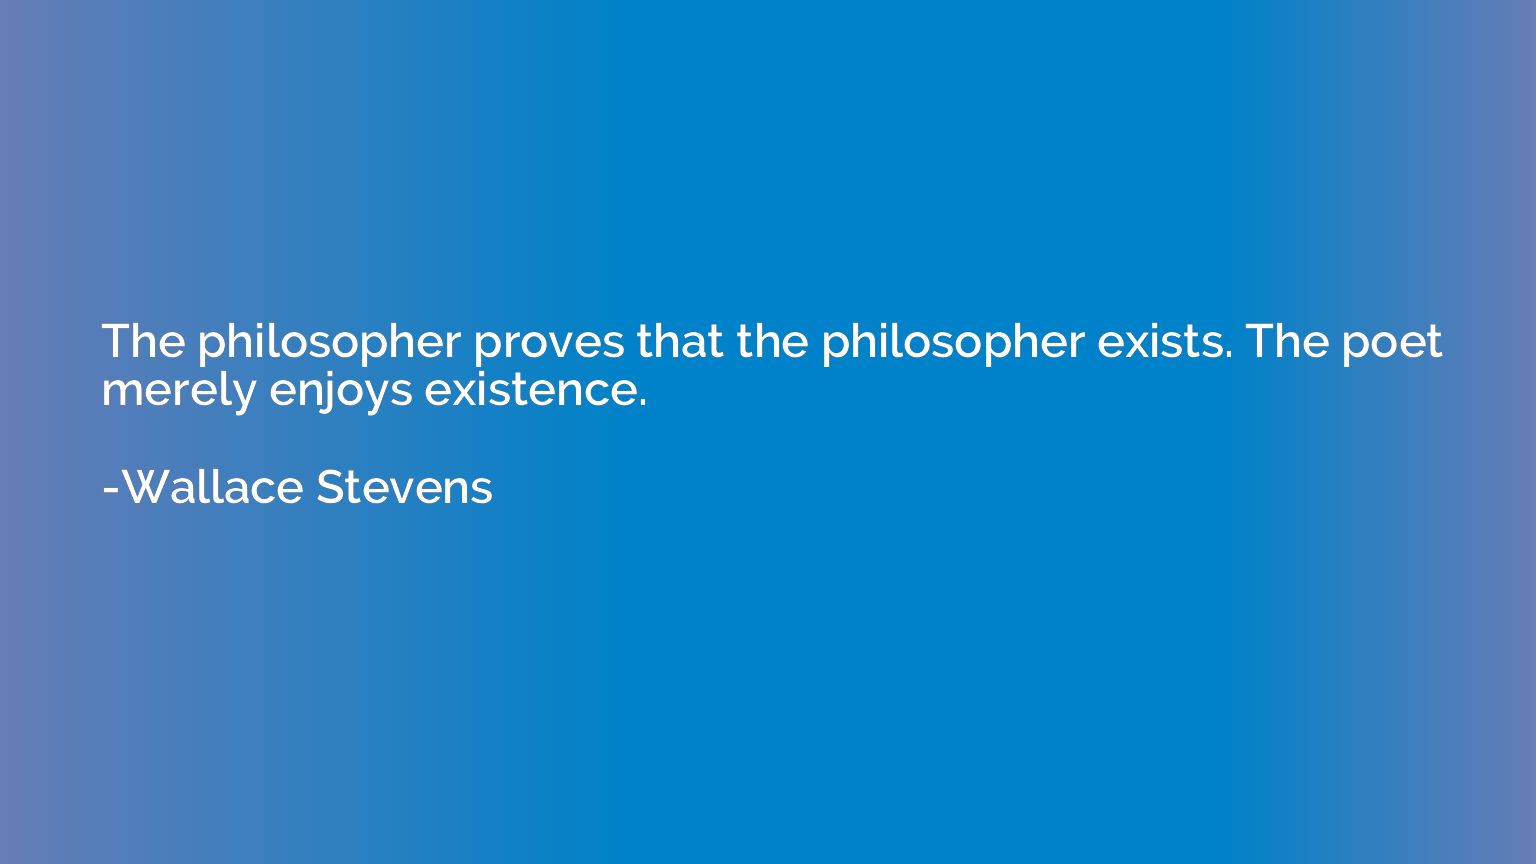 The philosopher proves that the philosopher exists. The poet